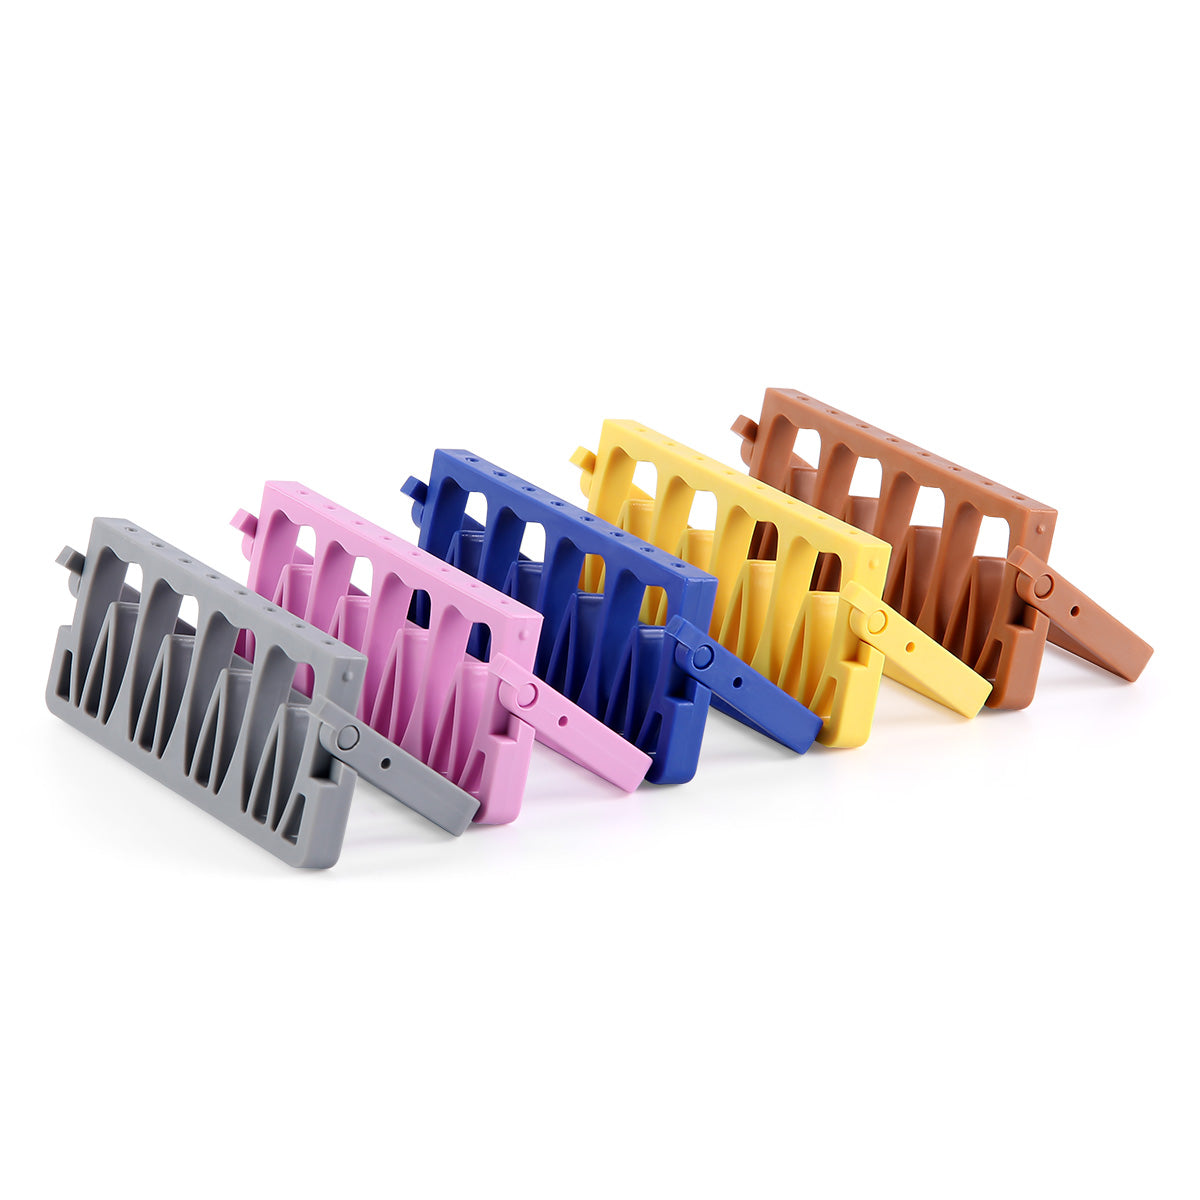 8 Holes Endodontic Root Canal File Drills Placement Disinfection Rack Stand - pairaydental.com